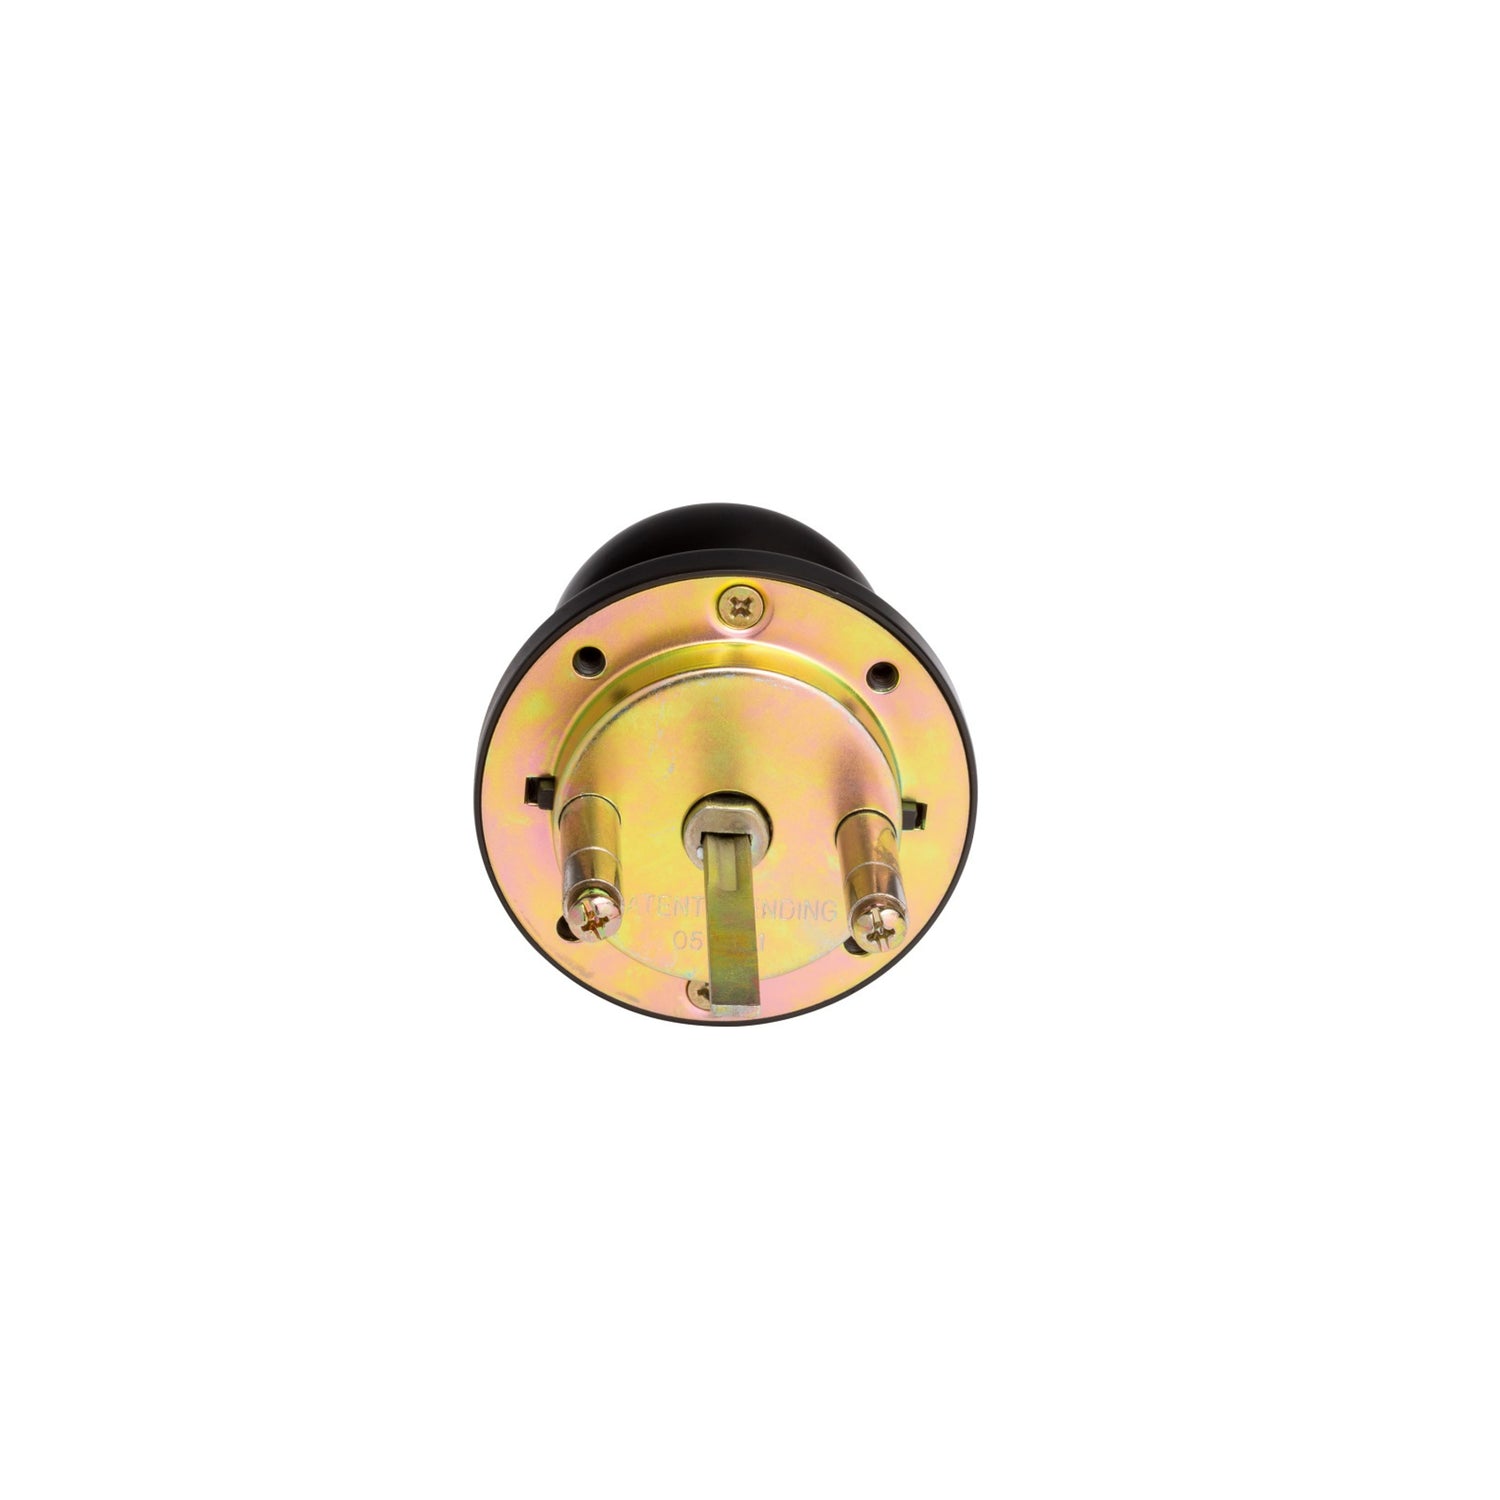 Oil Rubbed Bronze Commercial Entry Ball Knob Trim with Lock for Panic Exit Device -  Pro-Edge HD